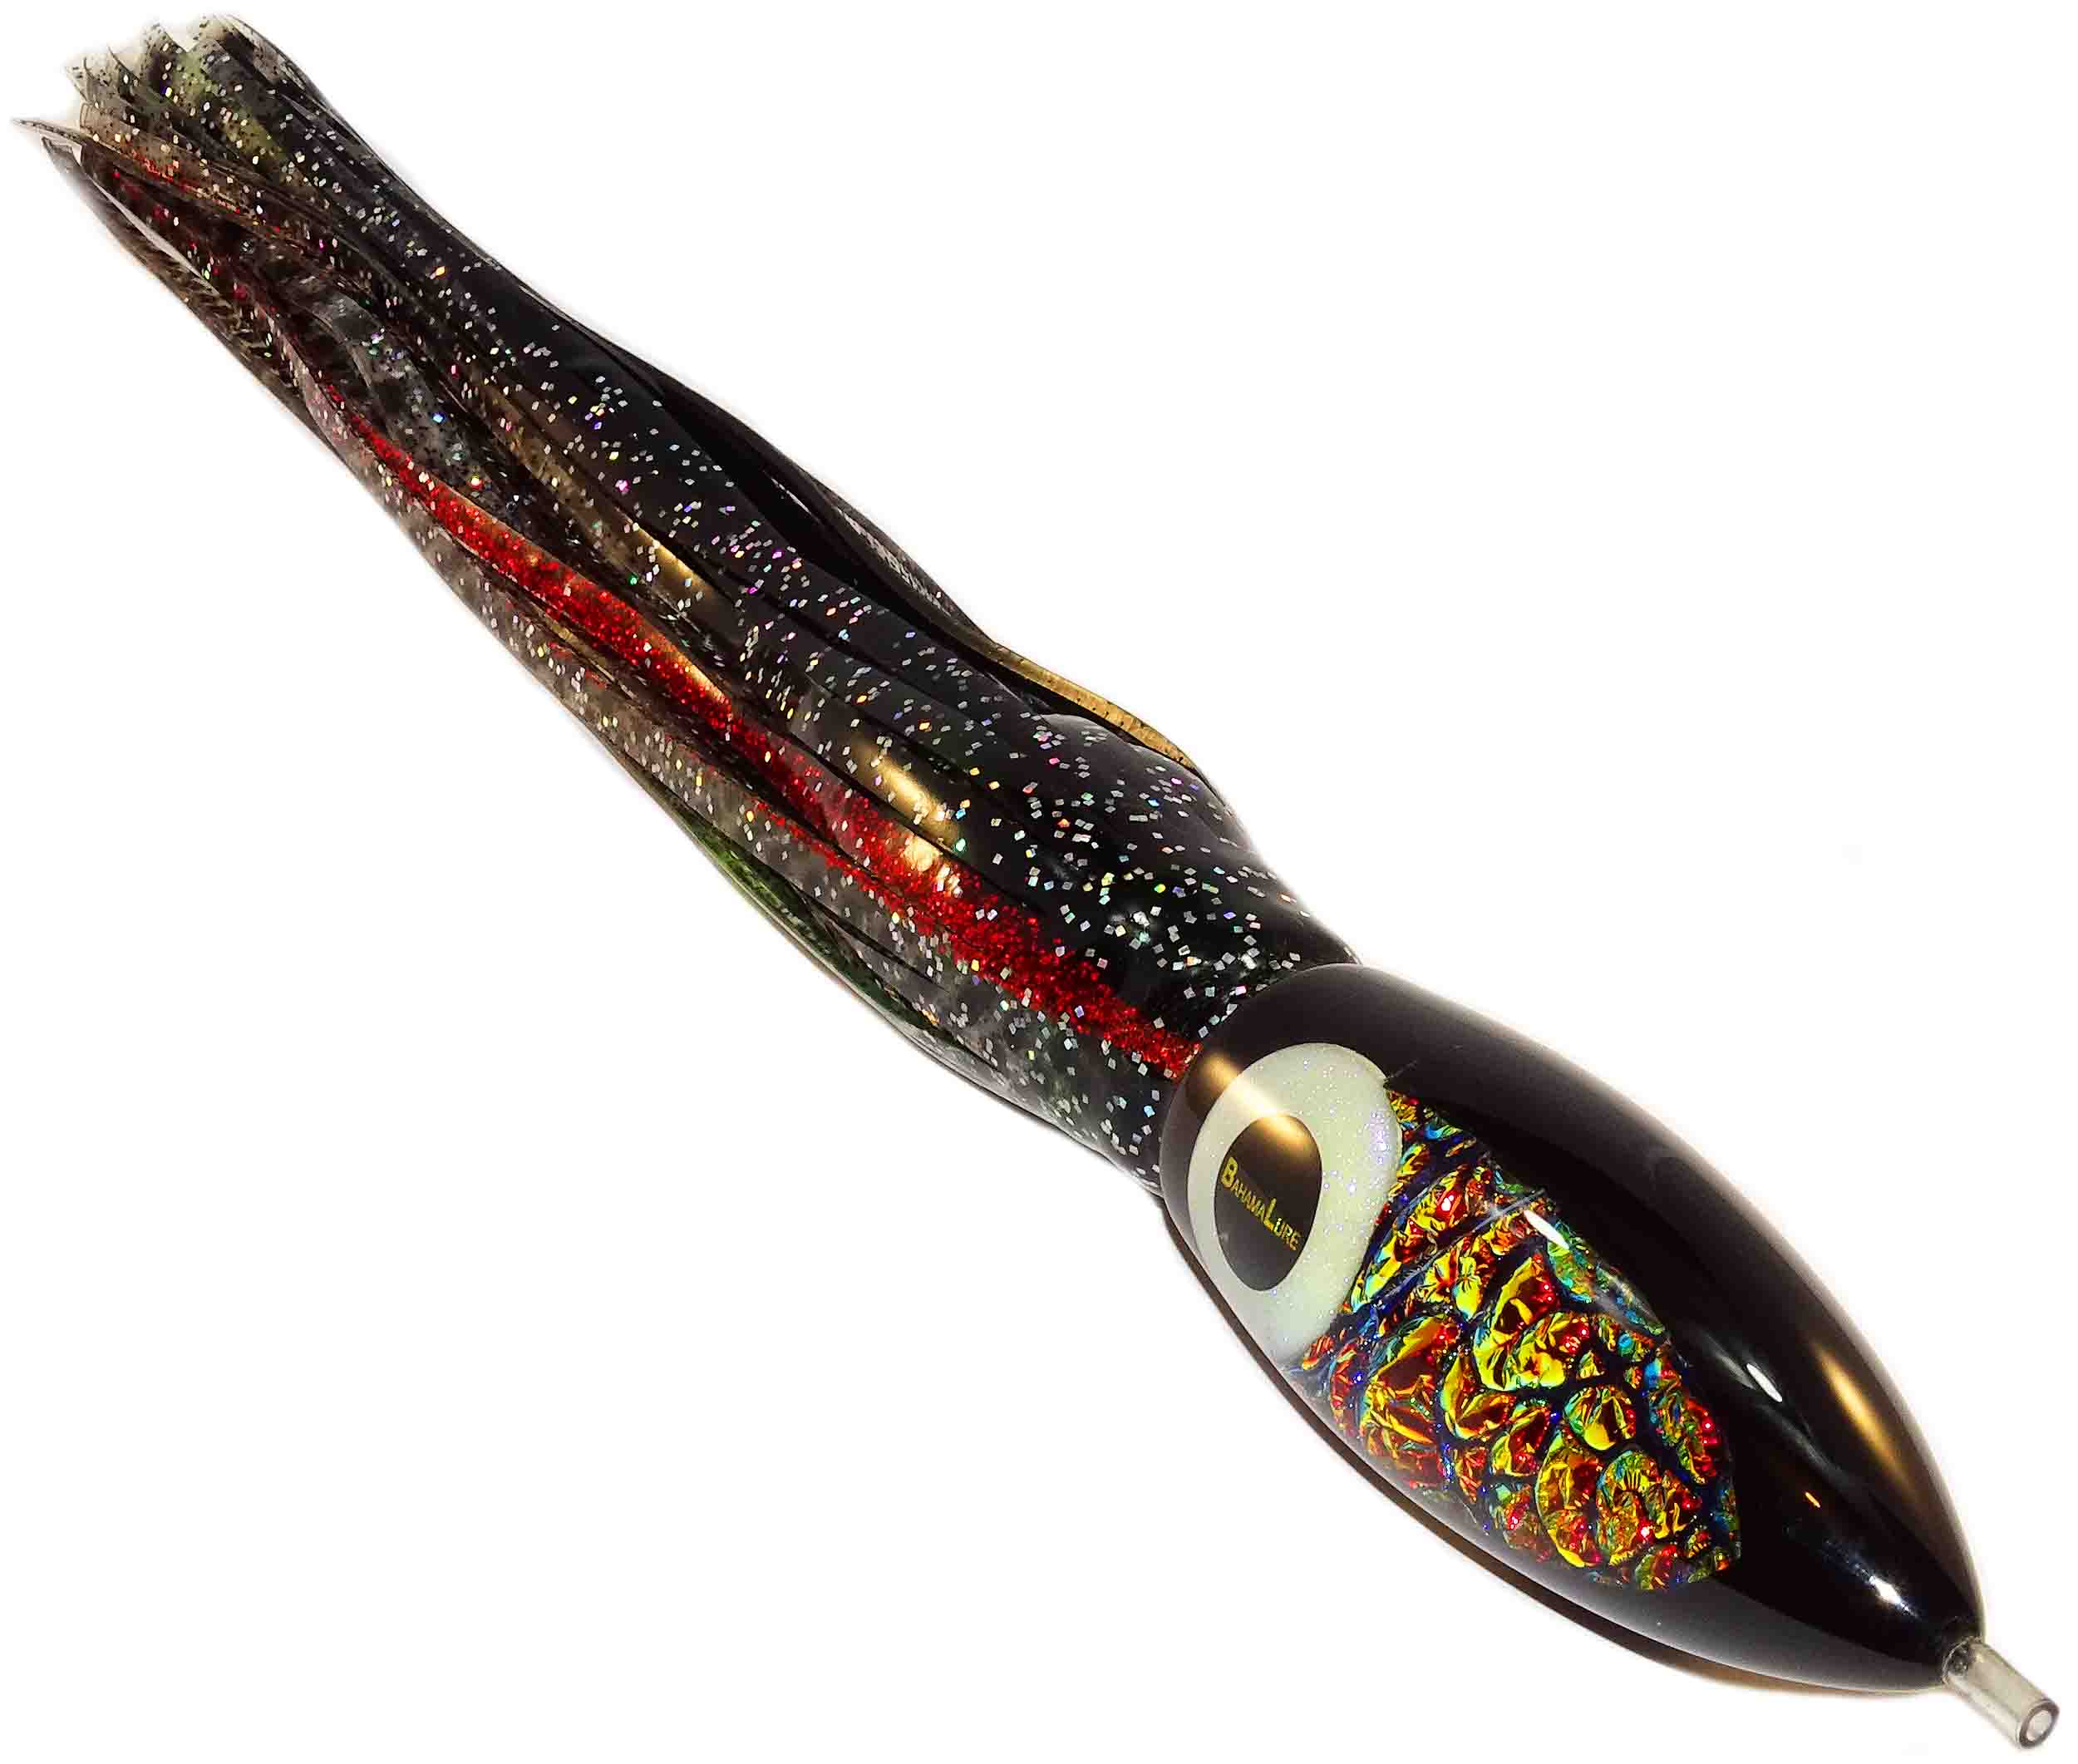 Bahama Lure - Proteus 50 Series - Red Dragon Hide with Black Insert - Black Metal